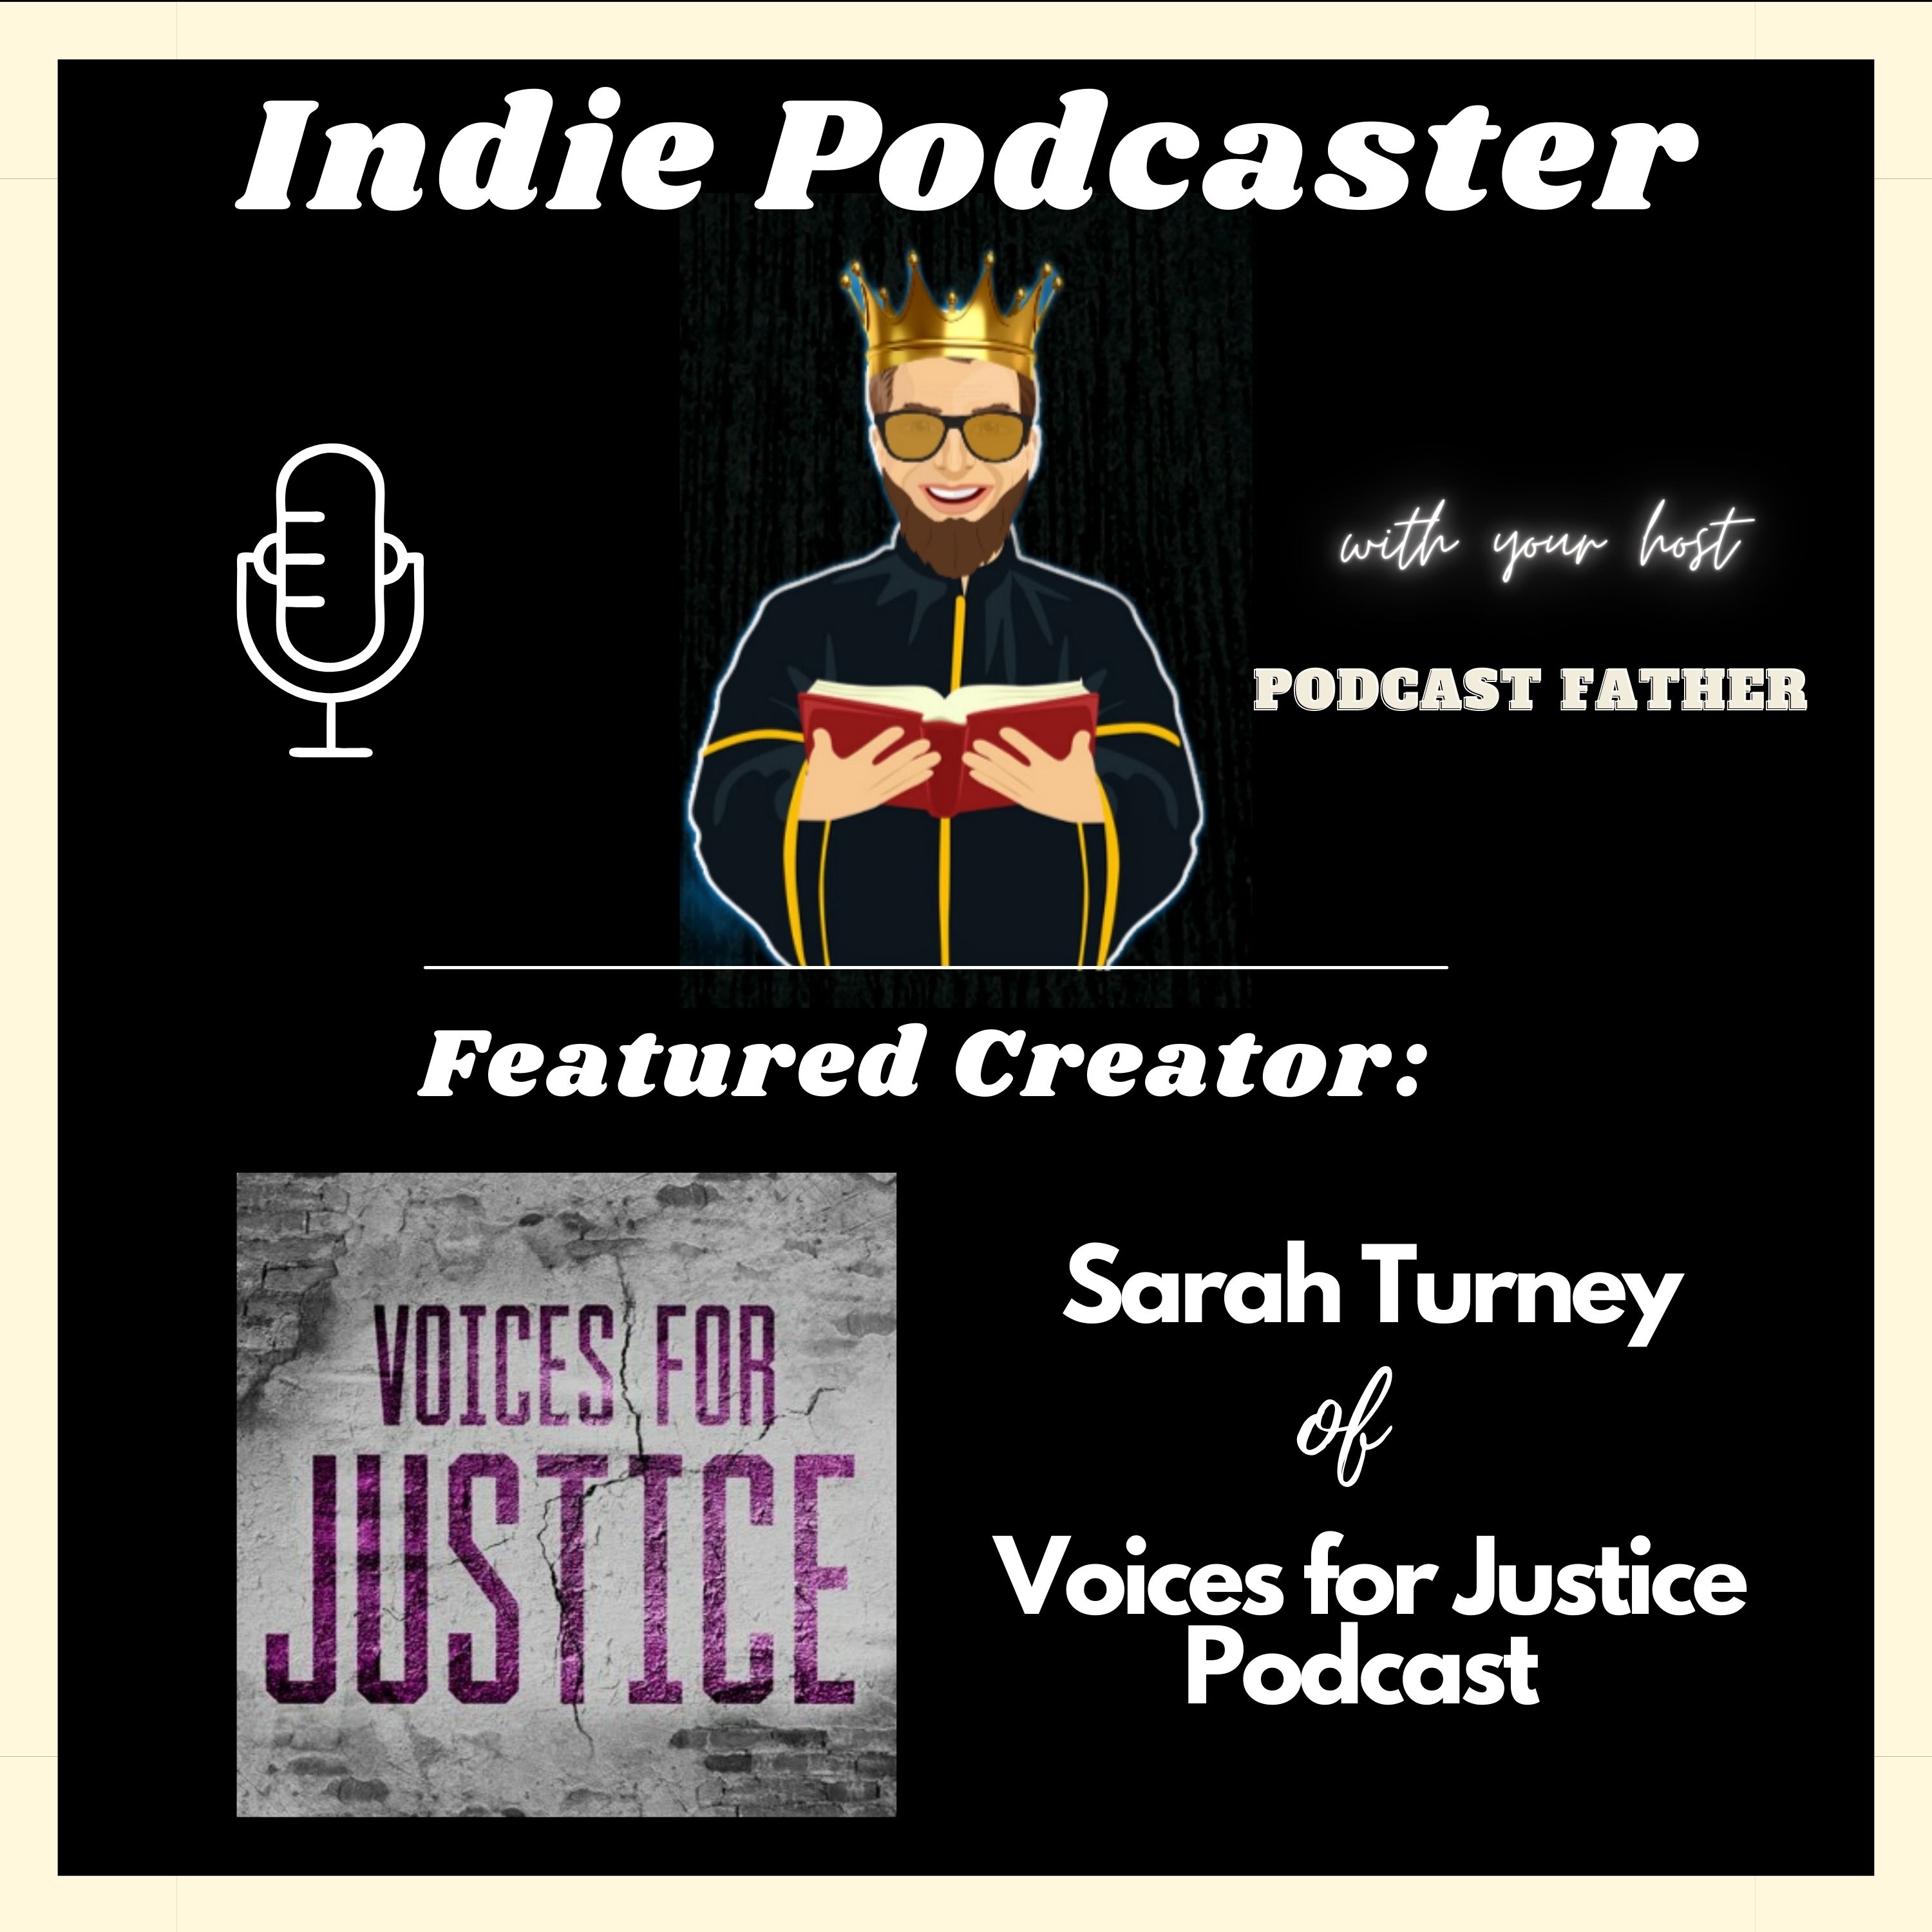 Sarah Turney from Voices for Justice Podcast Image